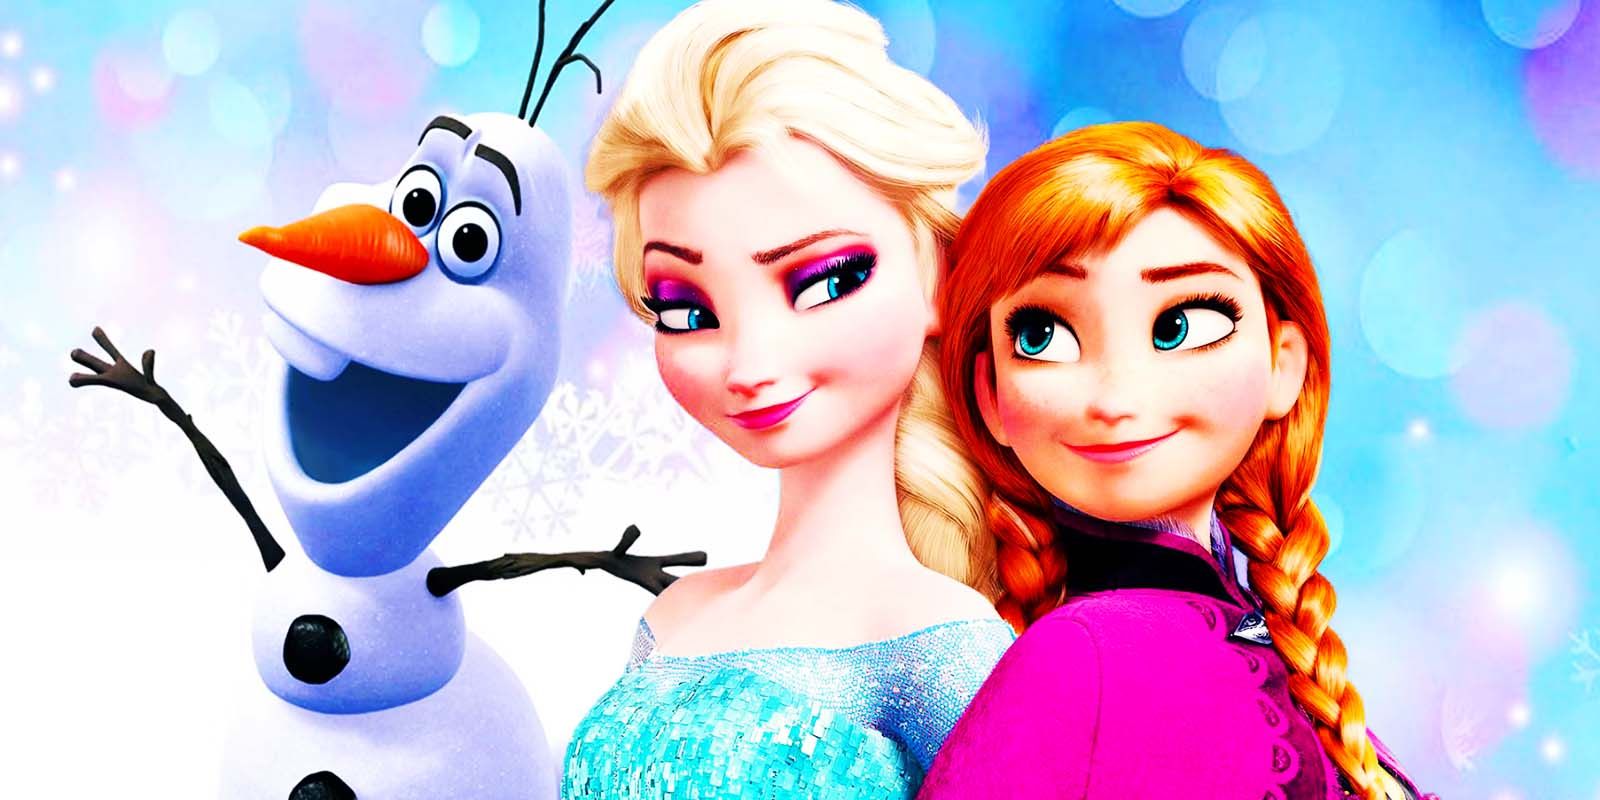 Olaf, Elsa and Anna in Disney's Frozen